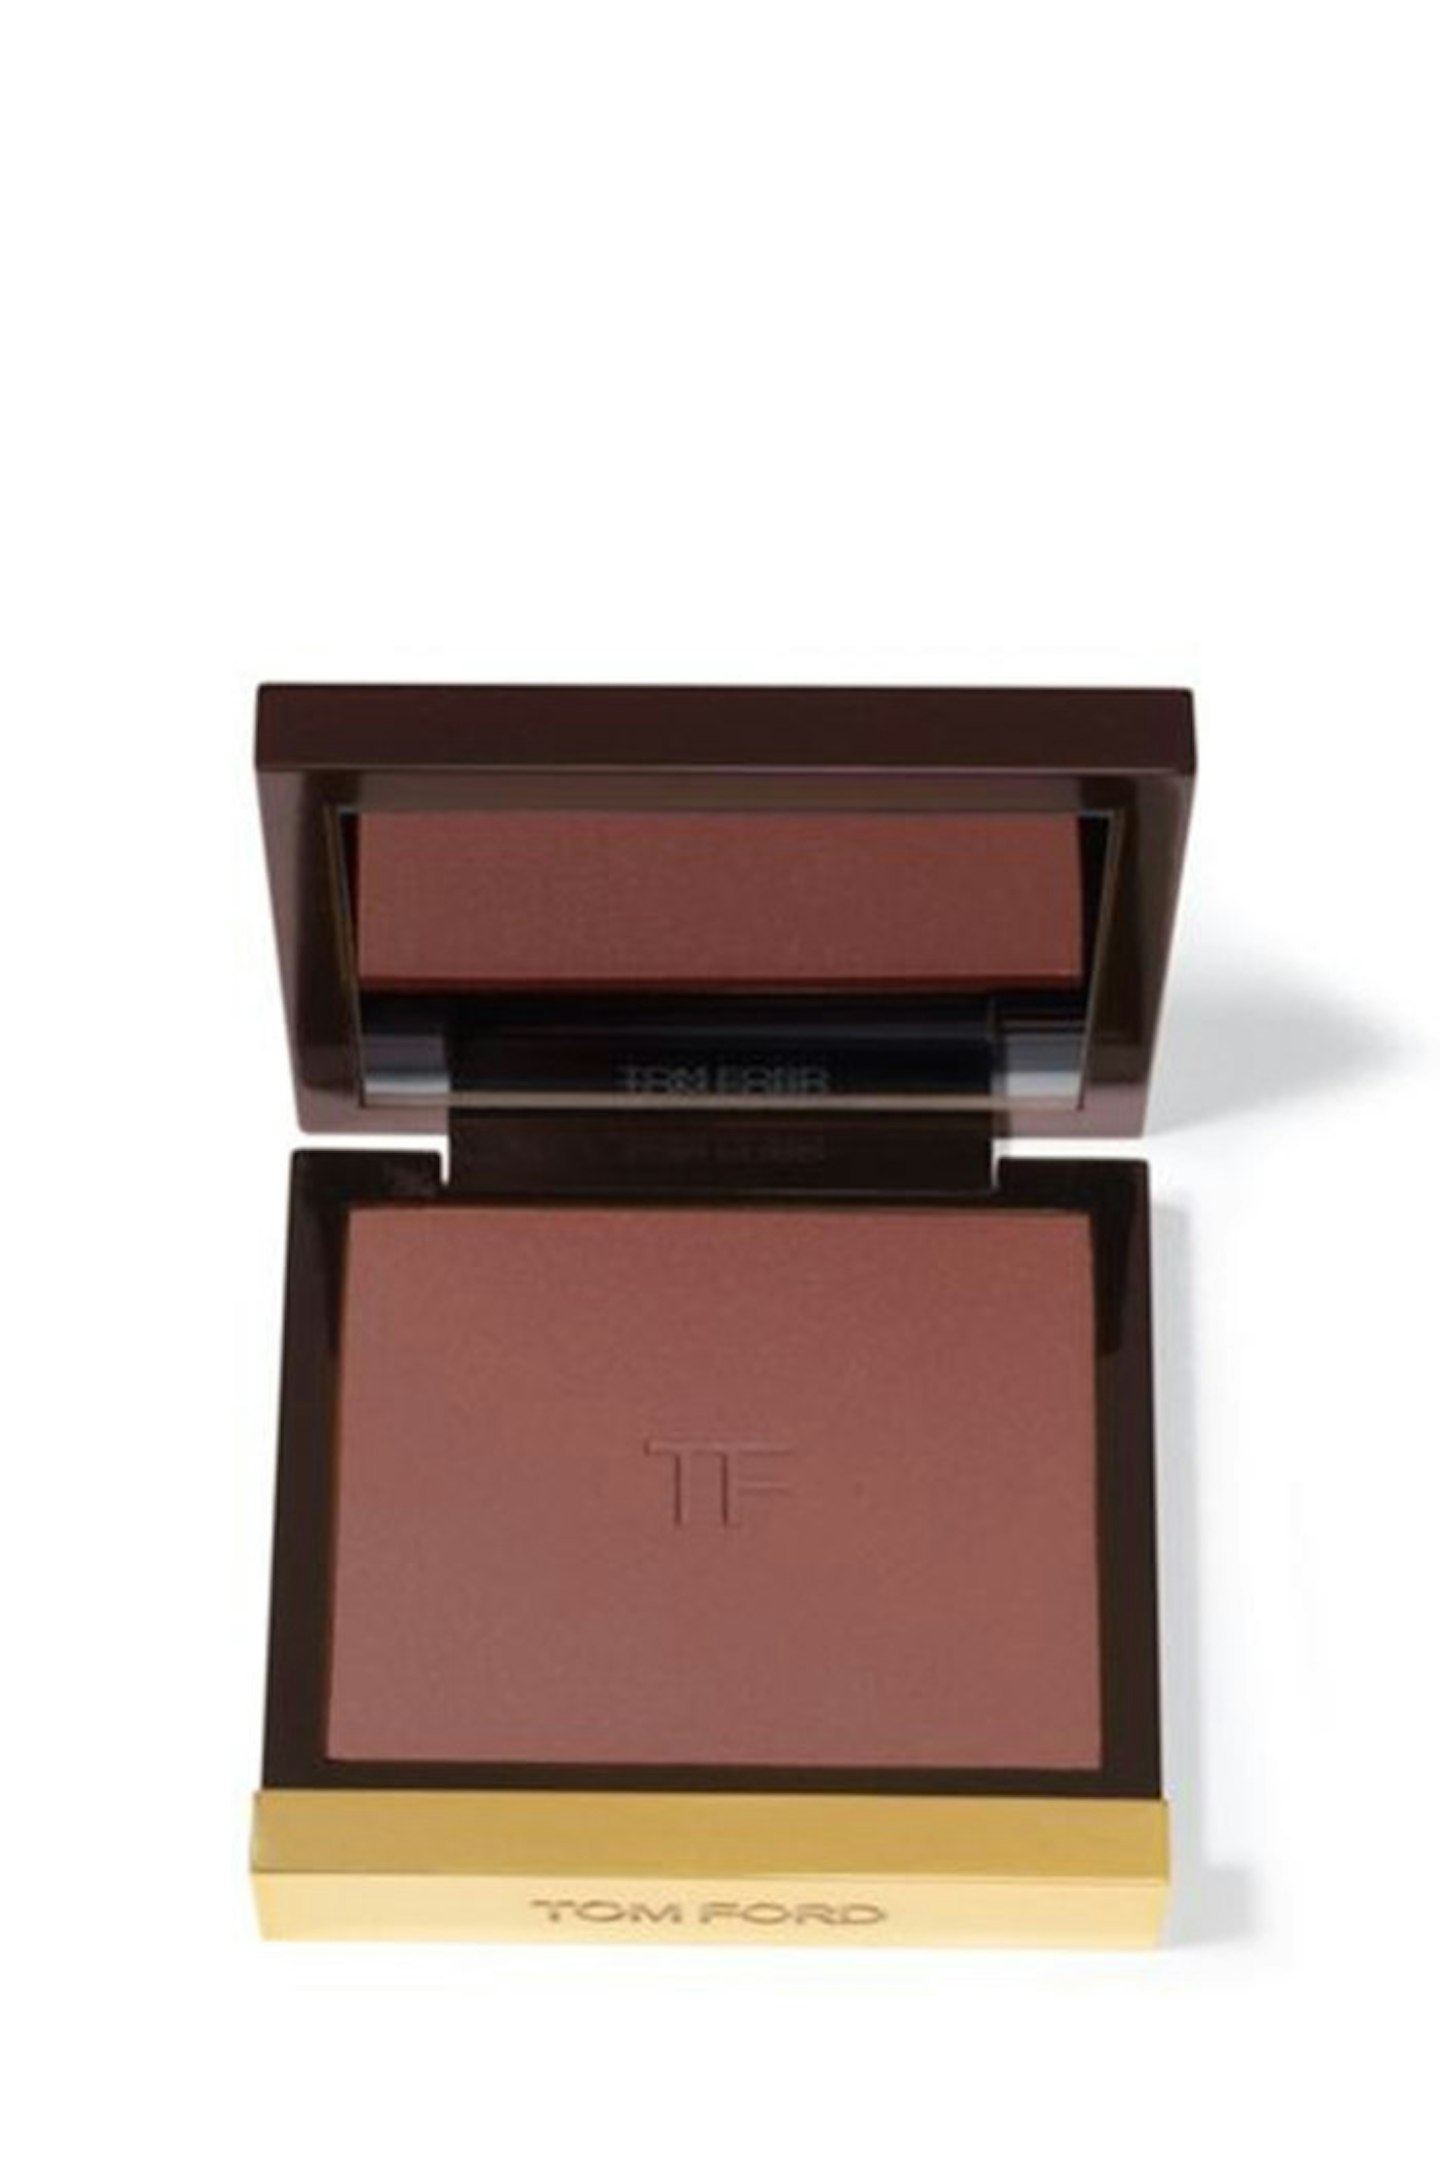 Tom Ford Cheek Colour in Savage, £46.00